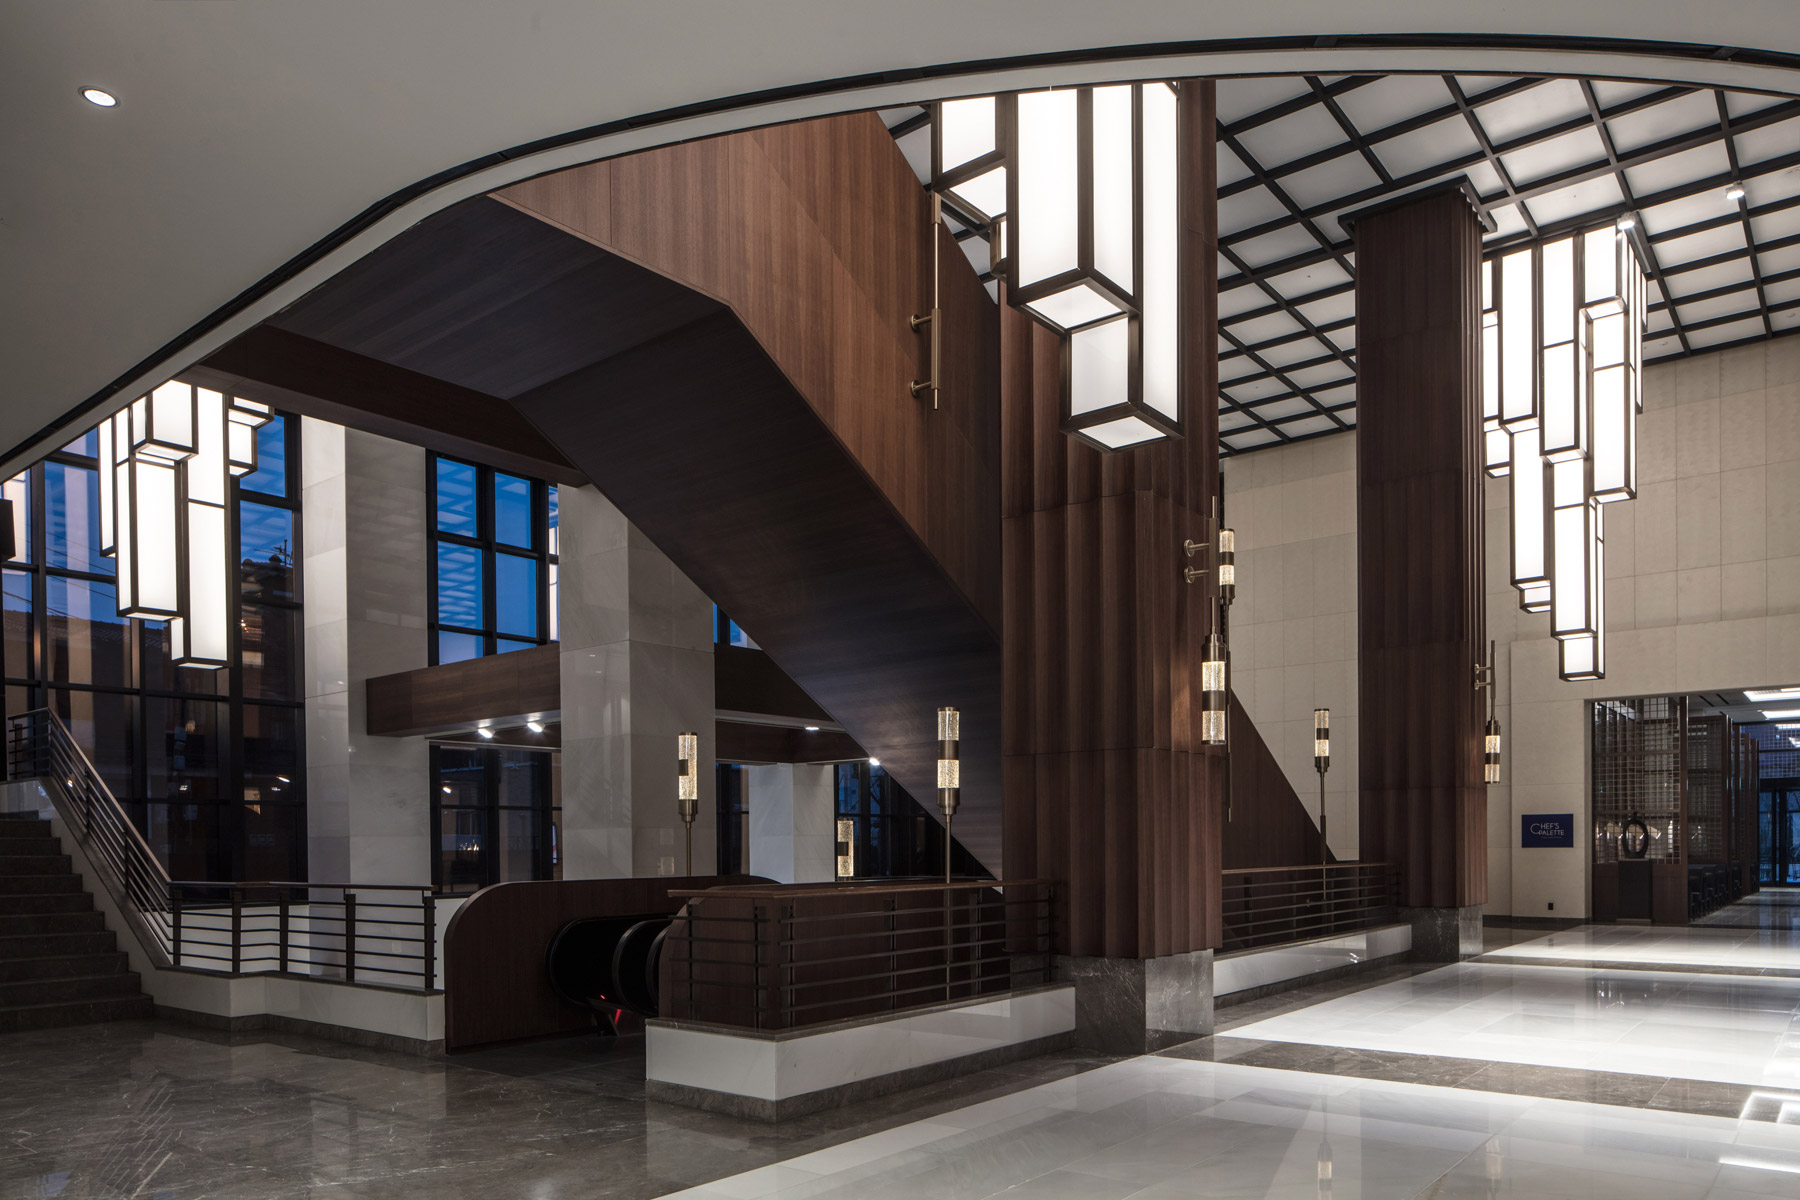 Seoul’s Le Meridien updates traditional Korean design for the modern day